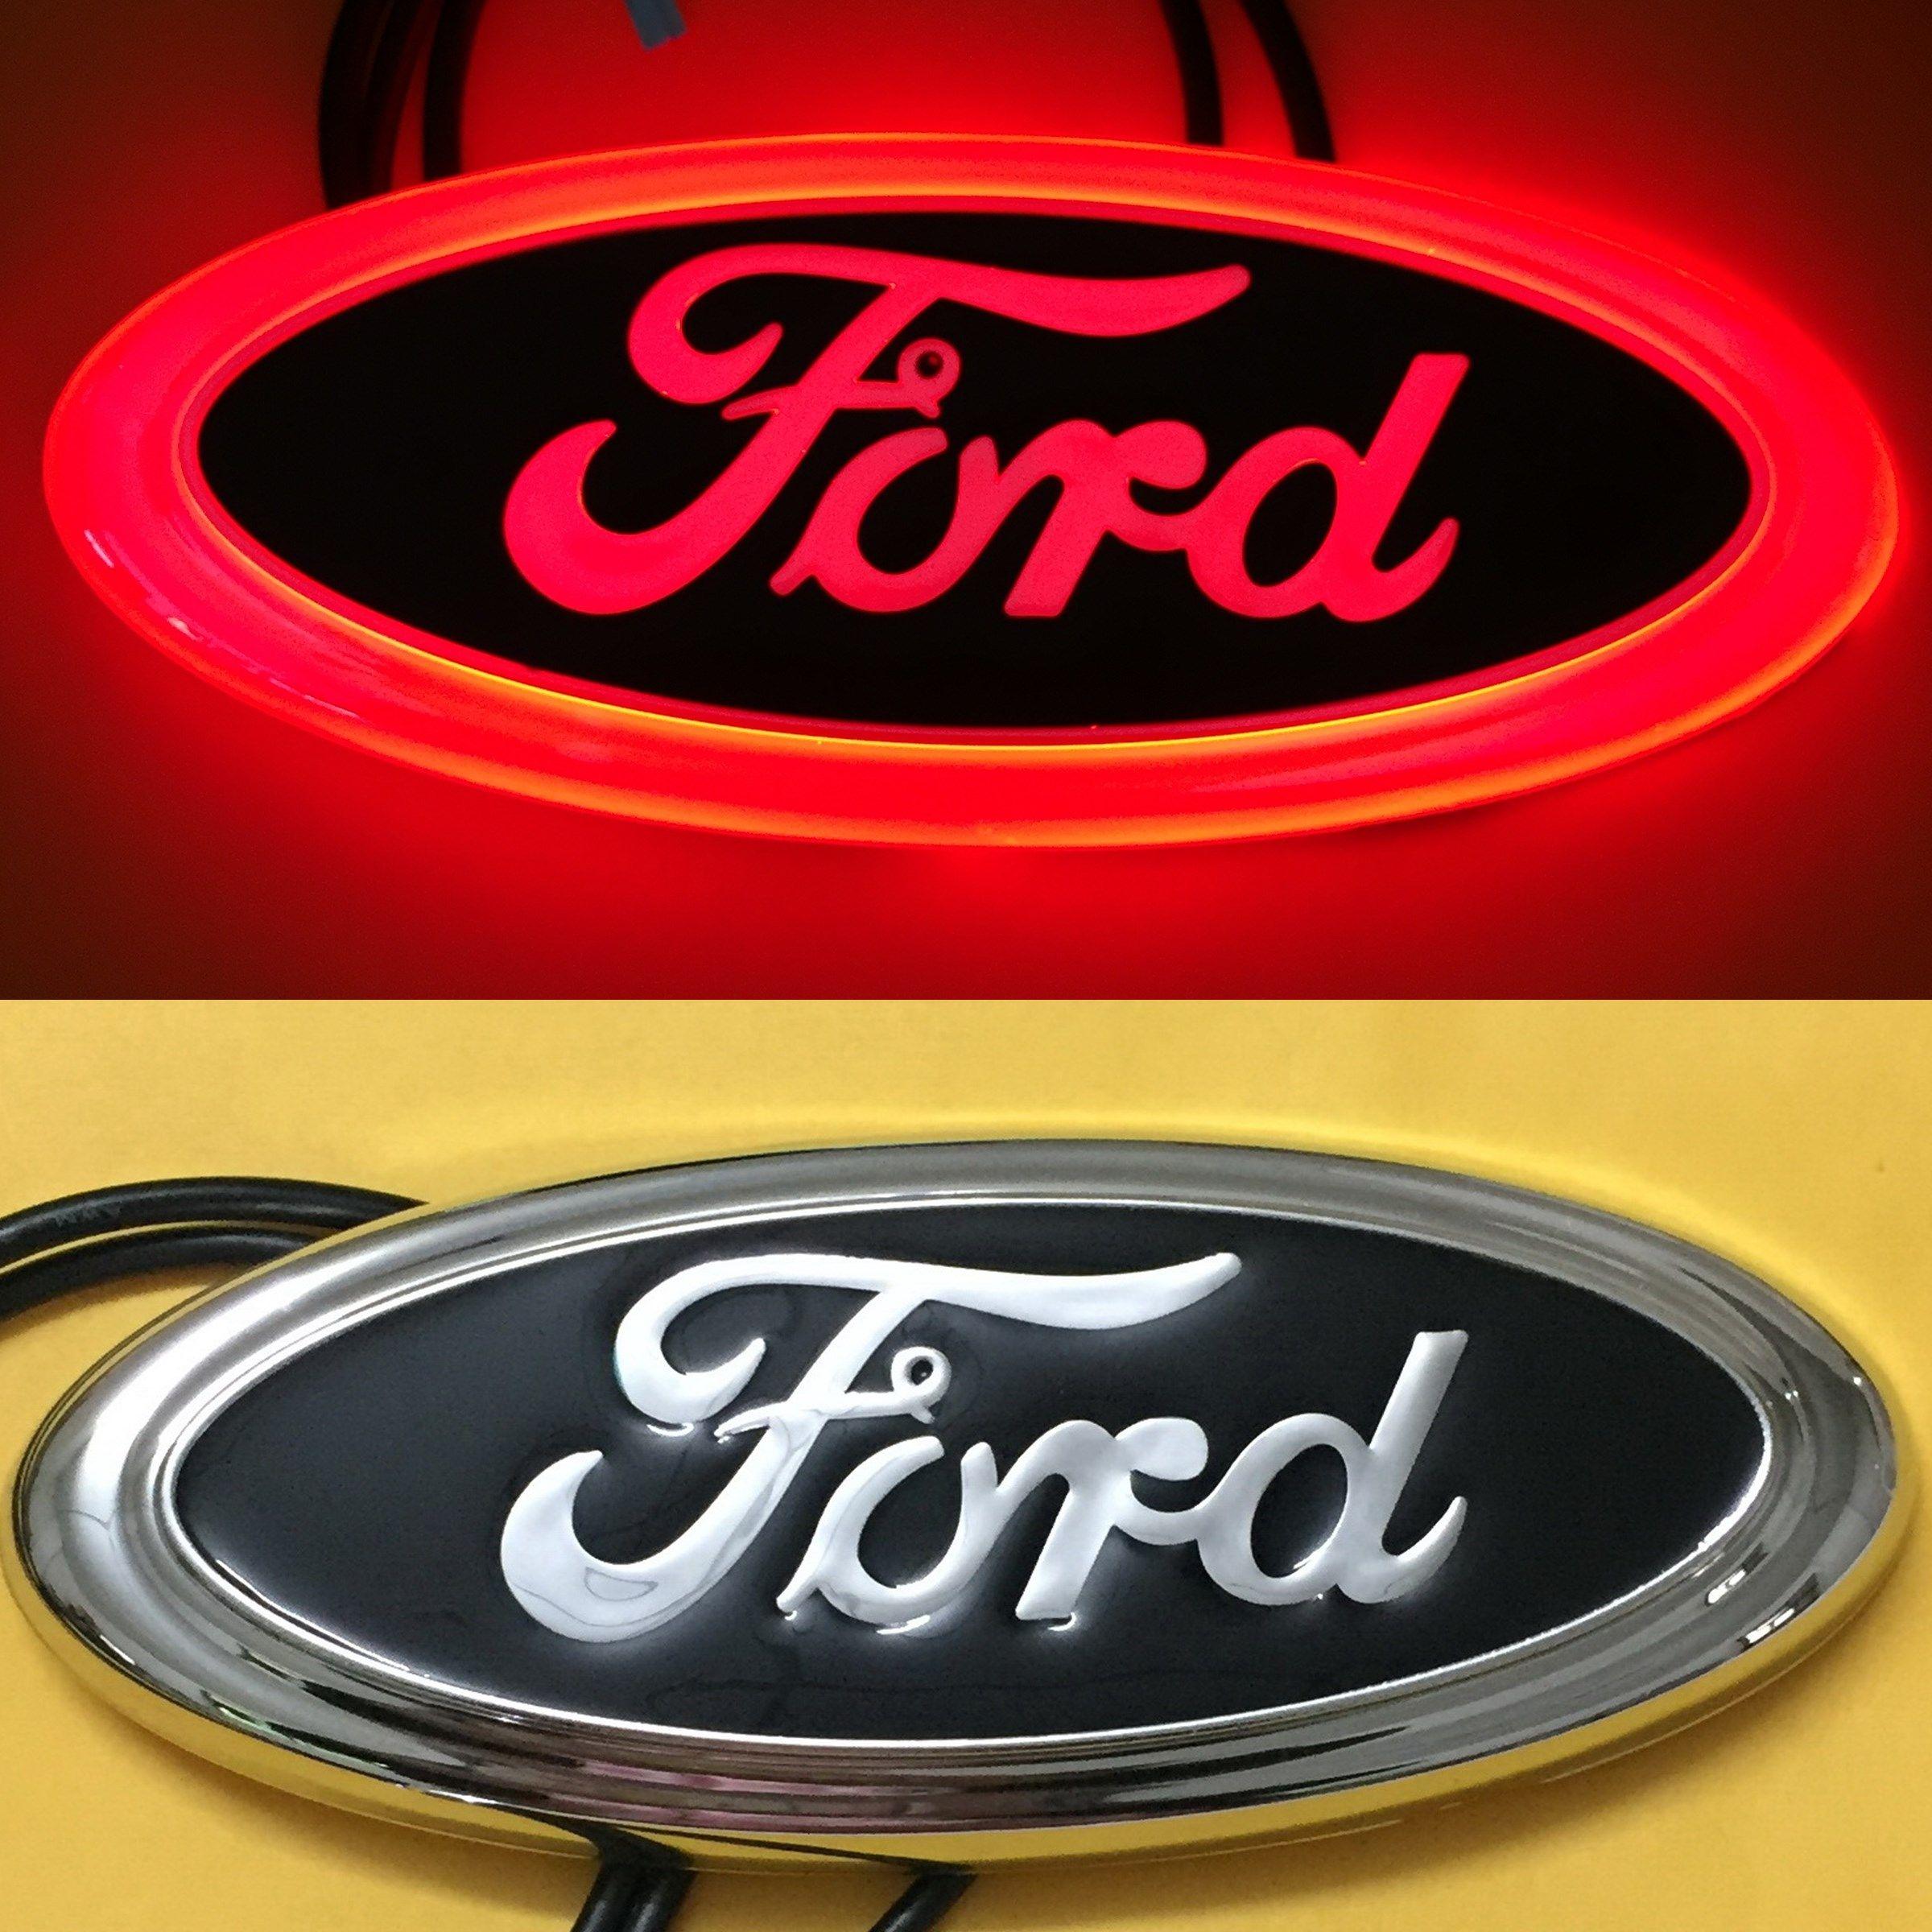 Red Oval Auto Logo - 4D LED Car Tail Logo Red Light for Ford Focus Mondeo Kuga Auto Badge ...